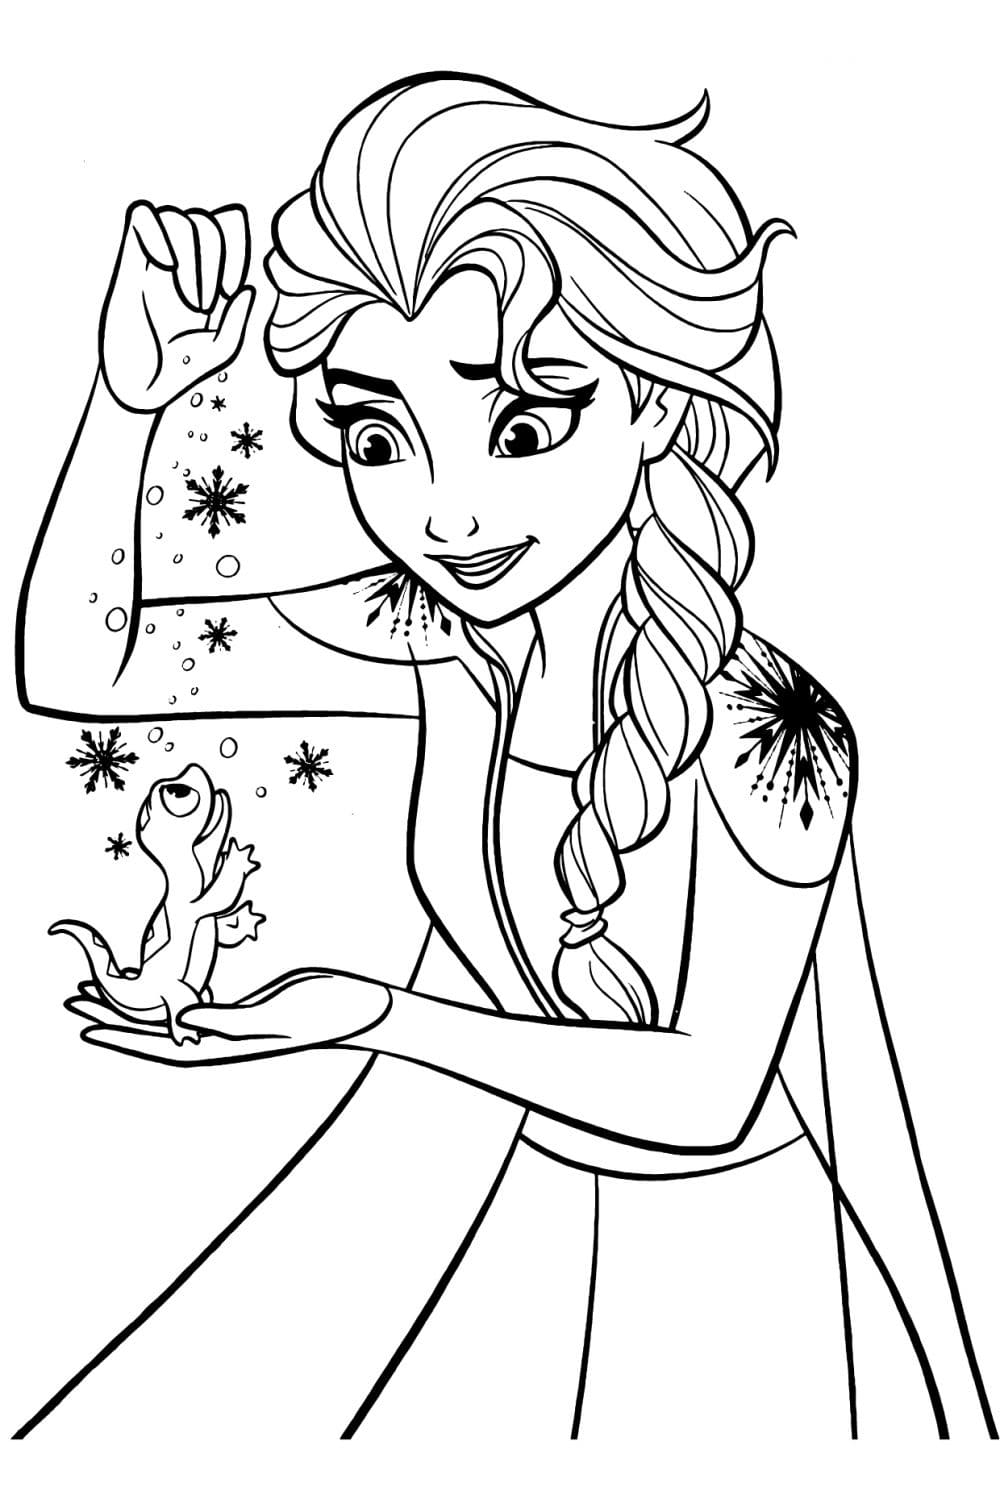 Free Printable Elsa Coloring Pages for Kids   Best Coloring Pages ...